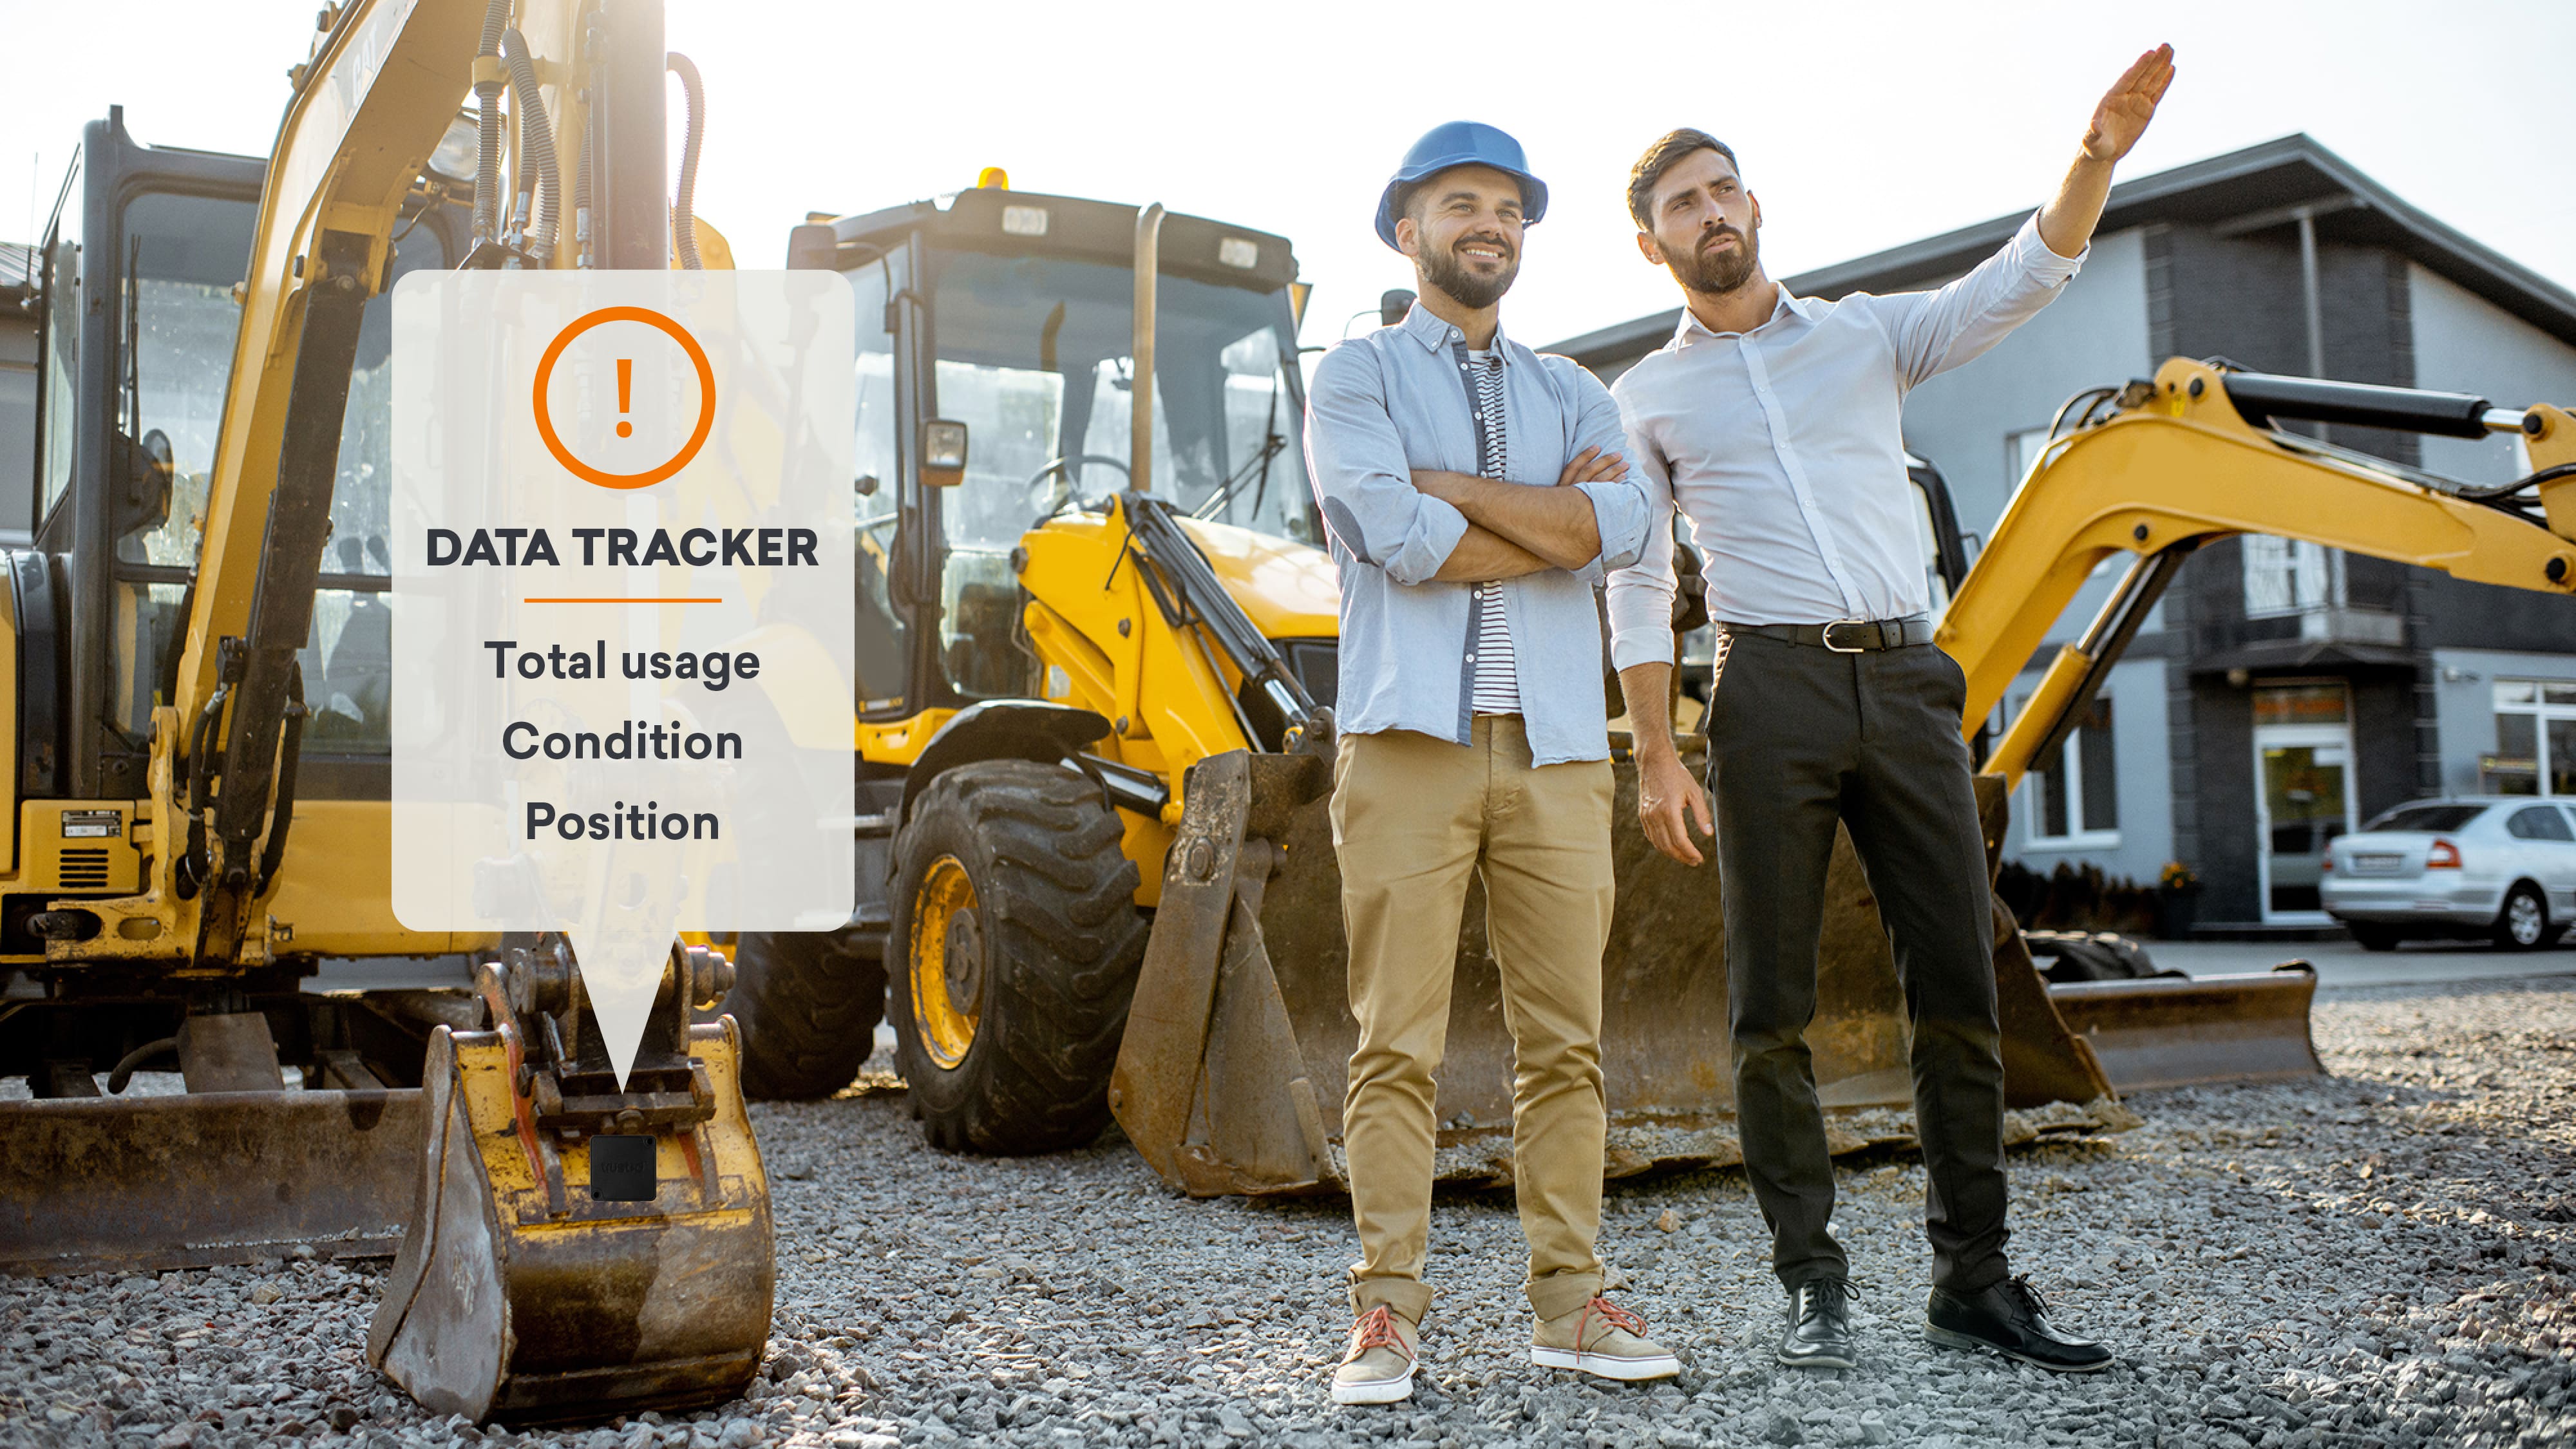 Data trackers in rental company